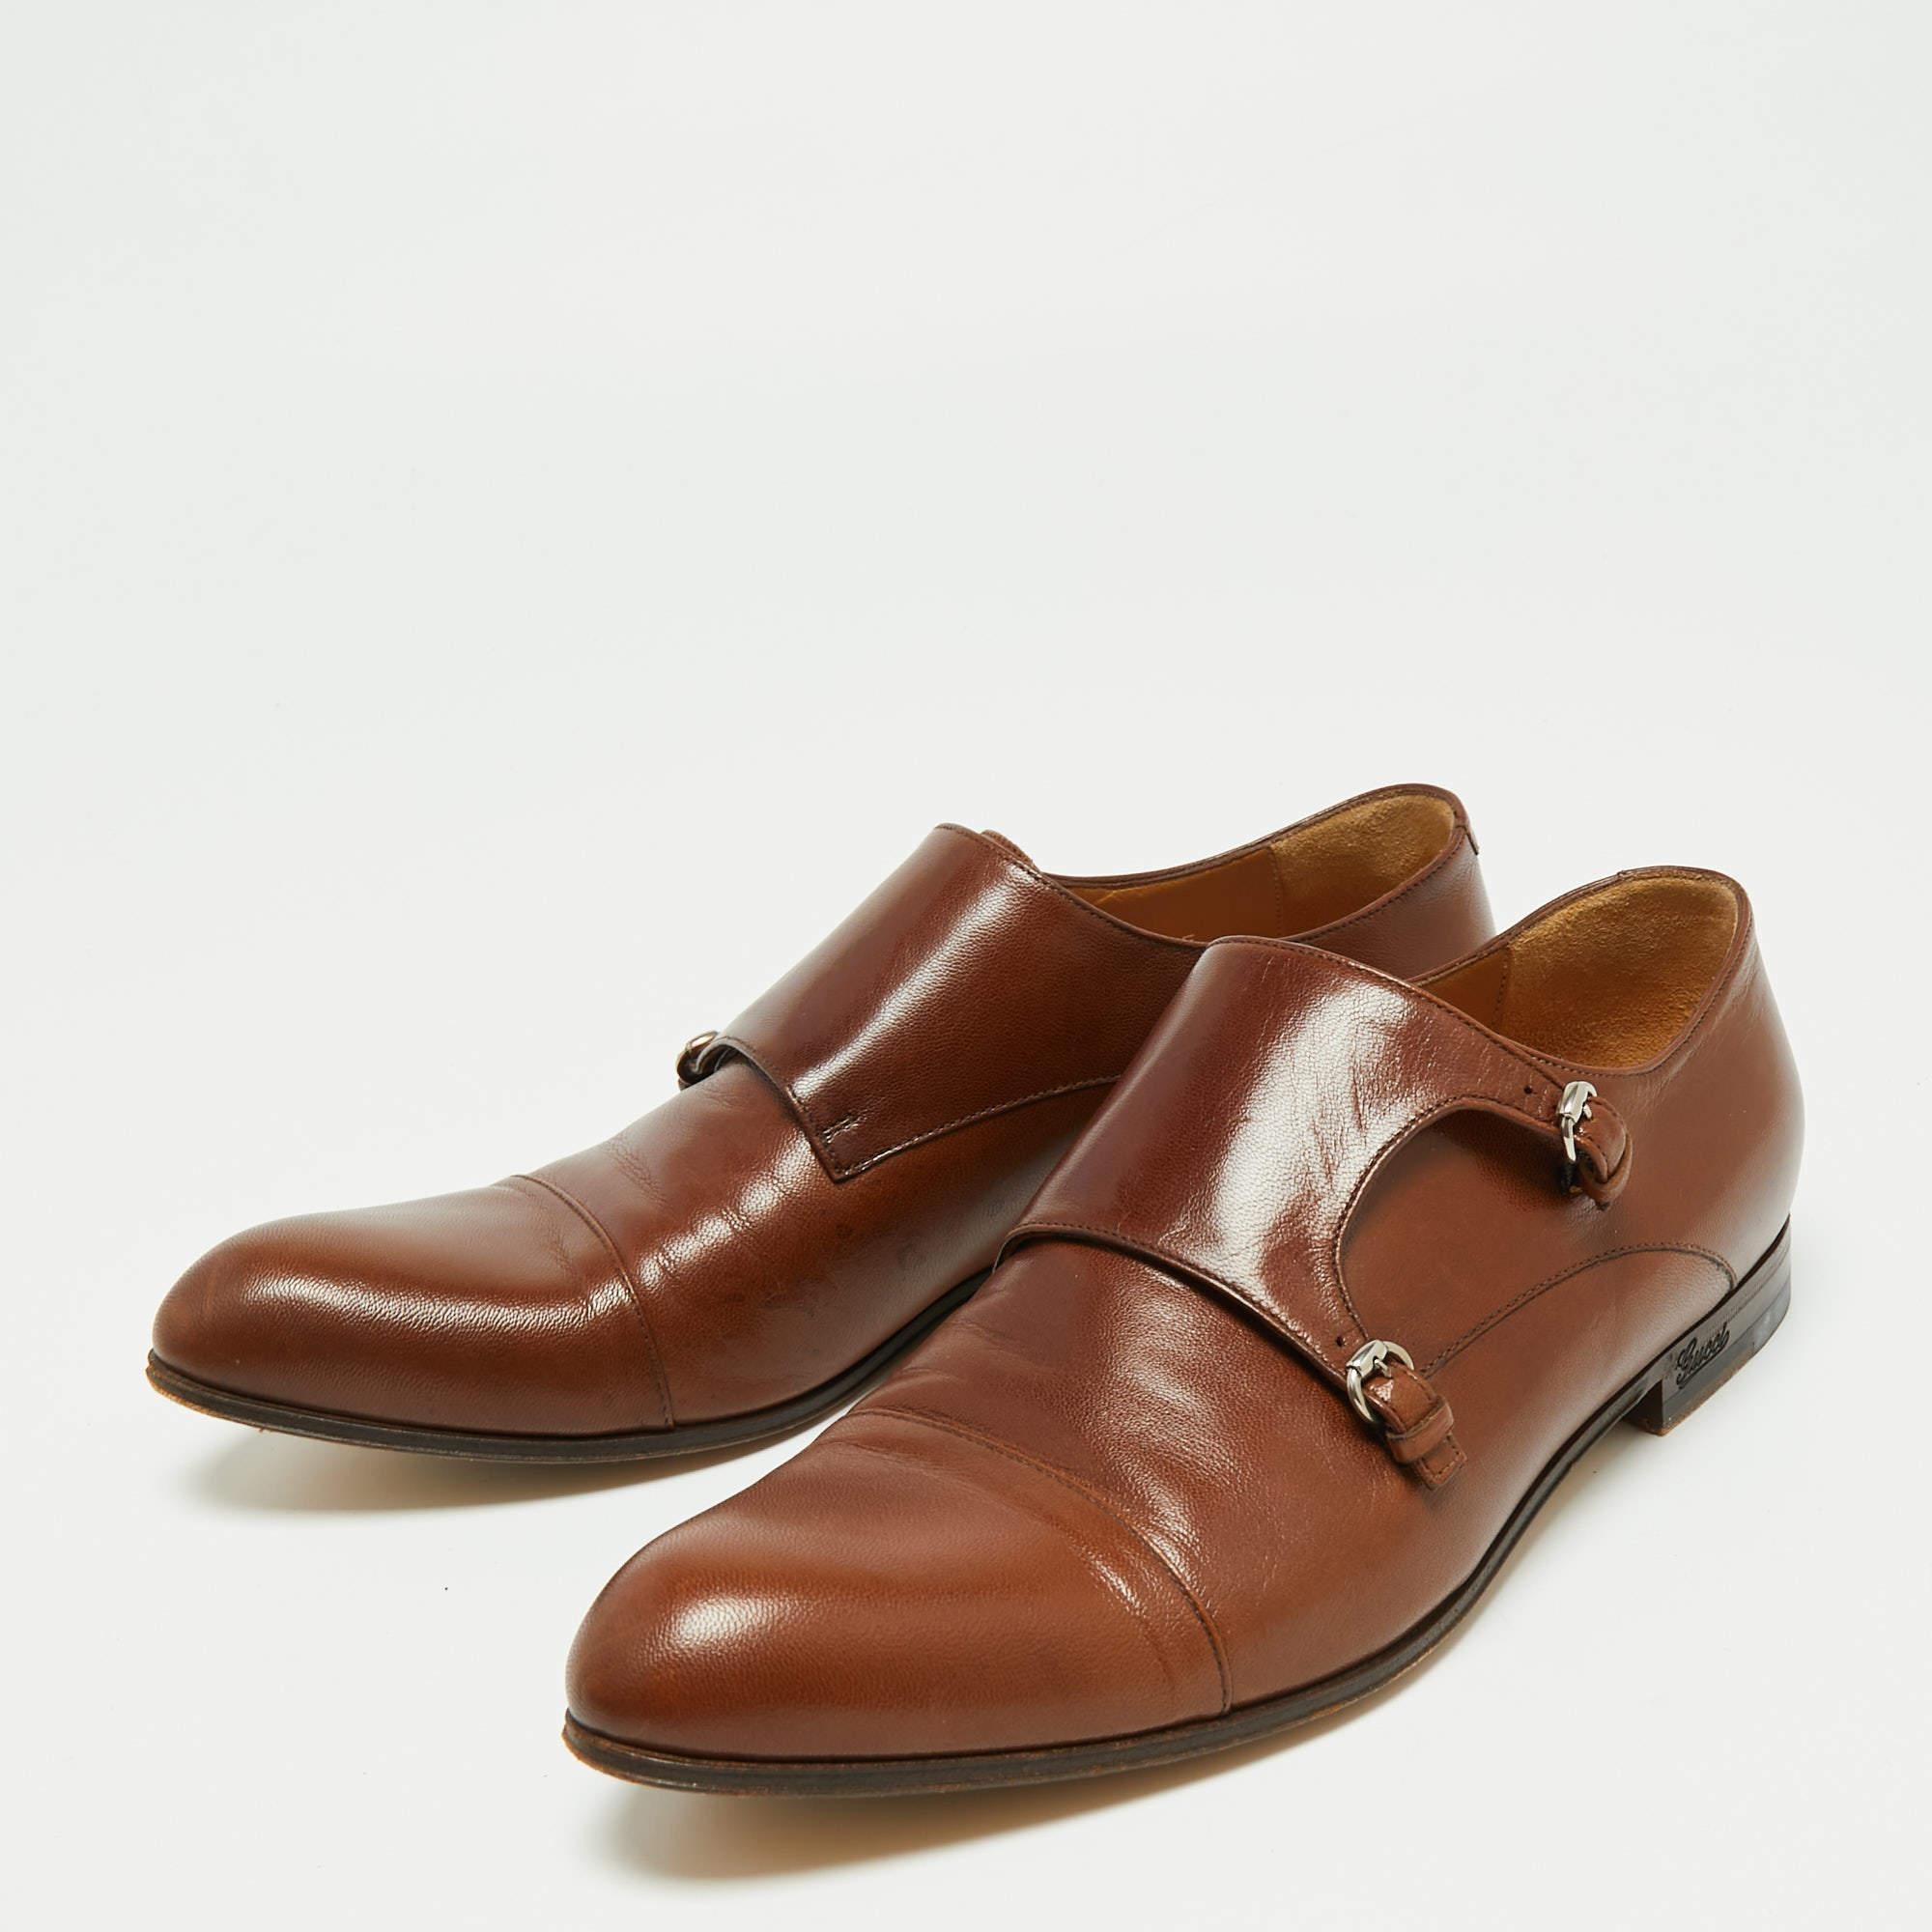 Gucci Brown Leather Double Buckle Monk Strap Oxfords Size 40.5 2